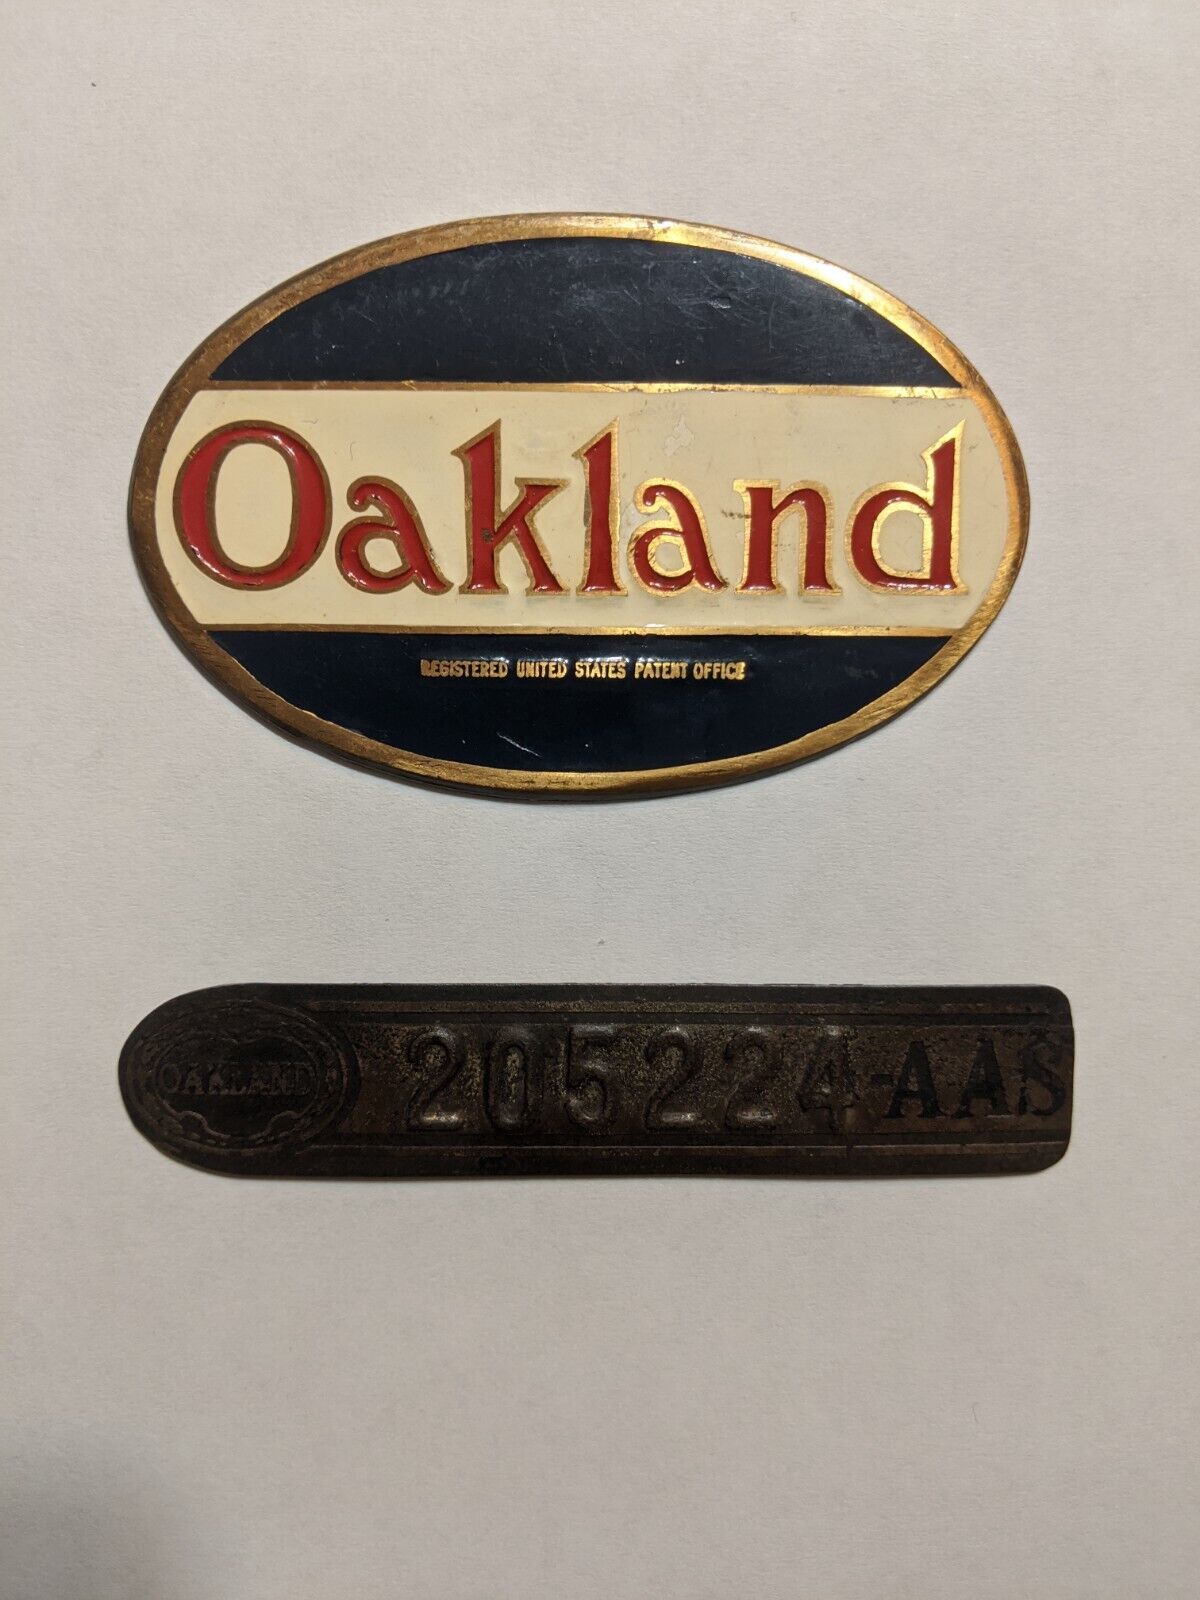 Oakland Radiator Badge & # Plate Motor Body VIN Collectible Antique 2pc Lot